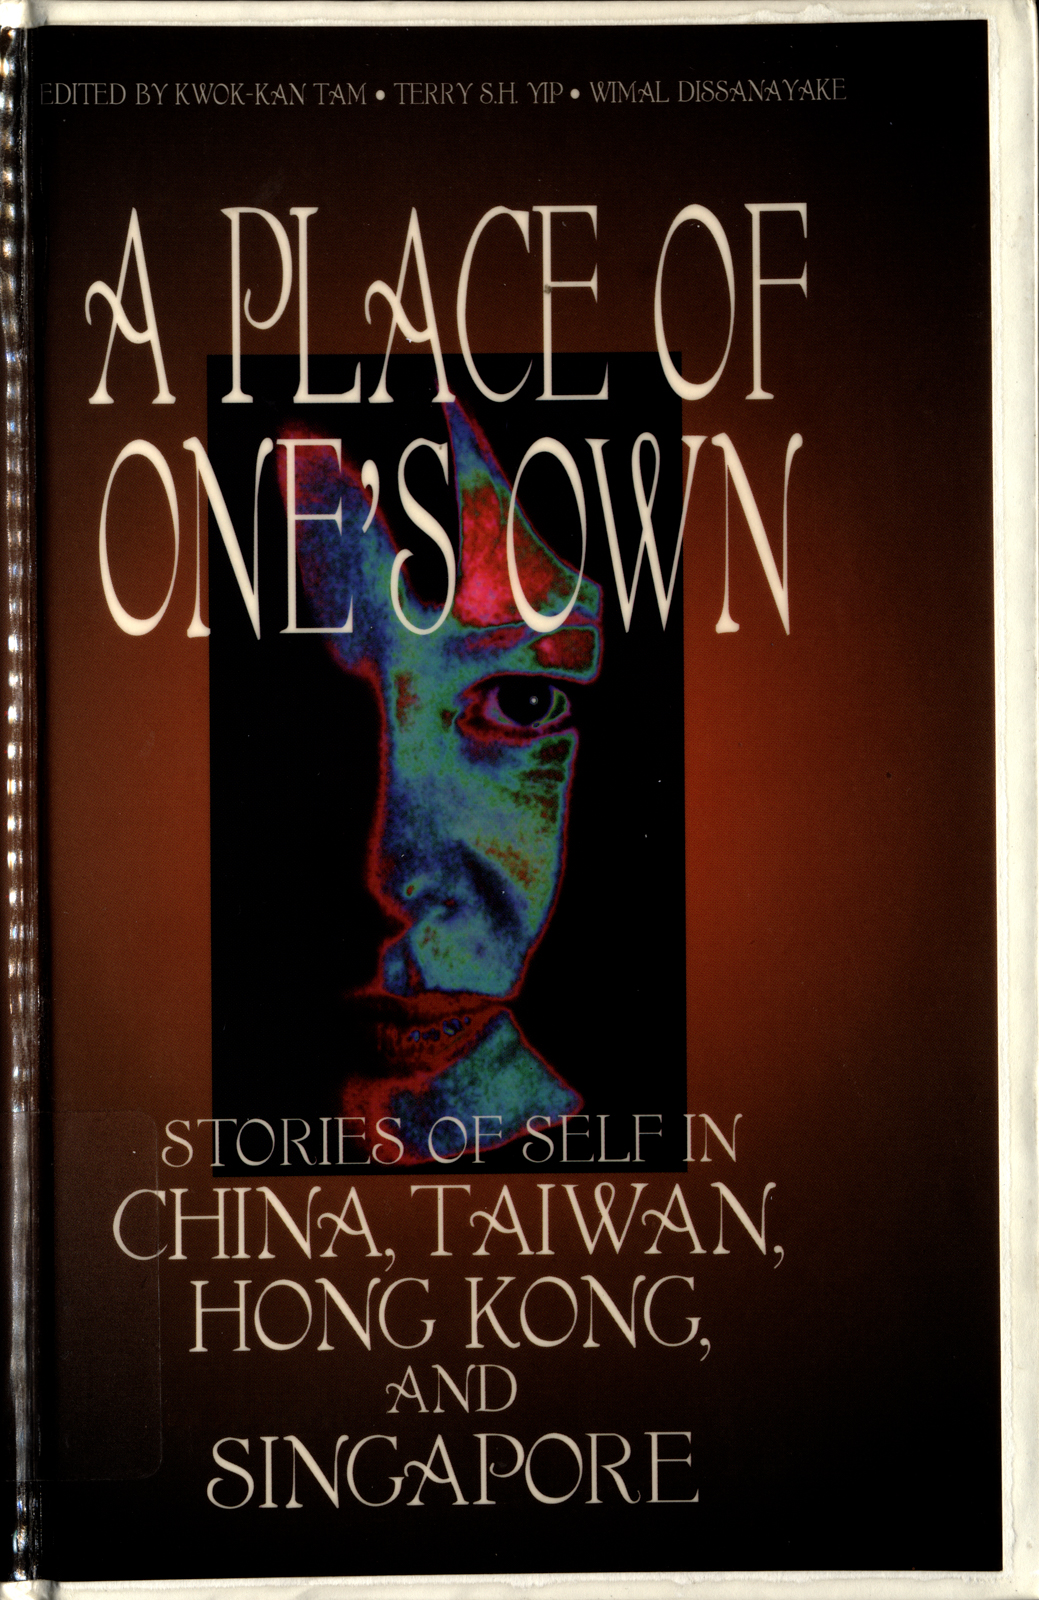 A Place of One's Own: Stories of Self in Mainland China, Taiwan, Hong Kong and Singapore